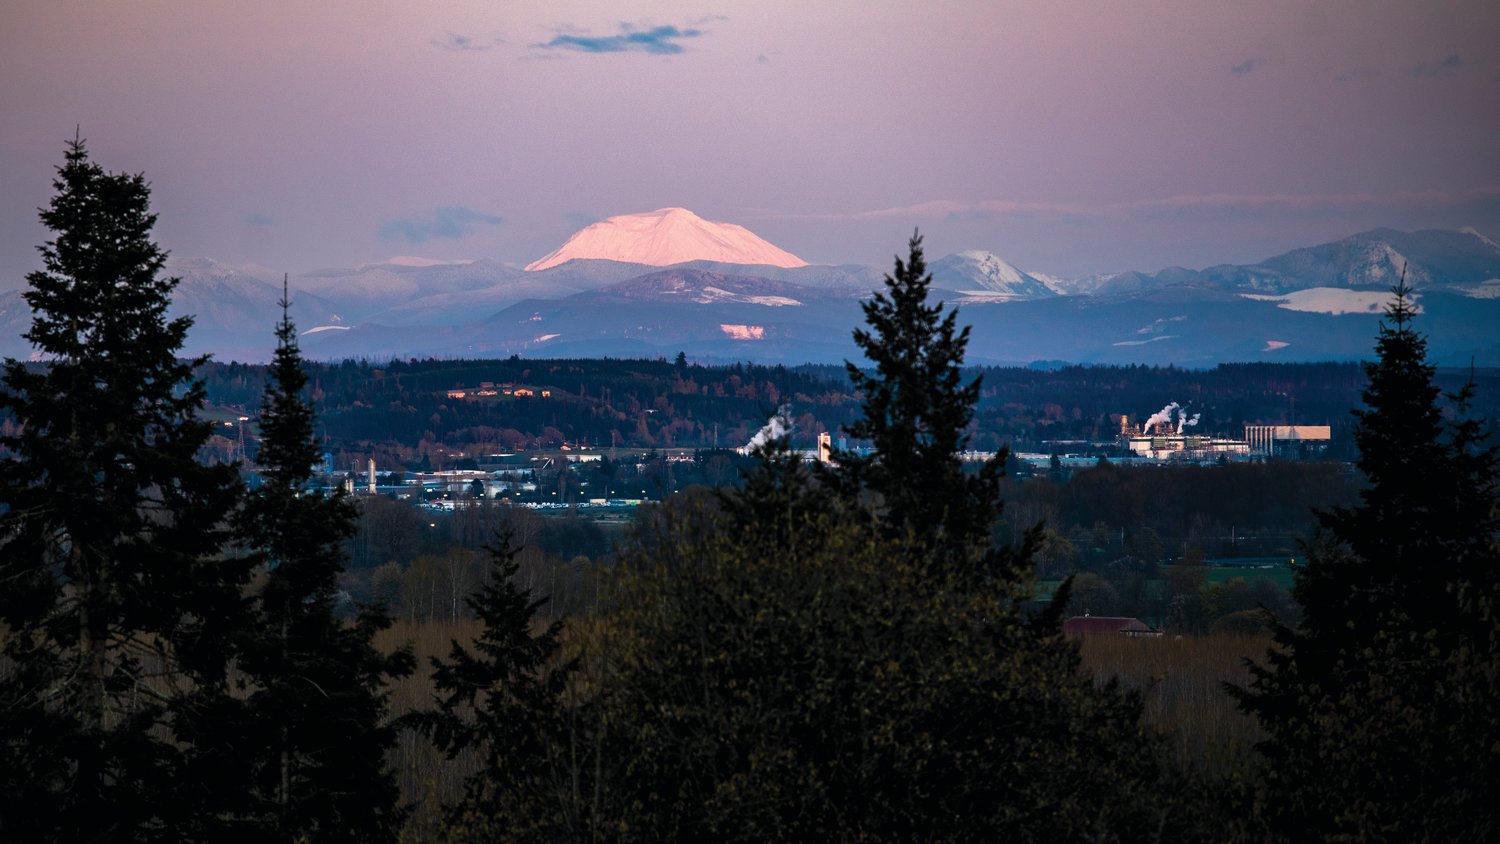 Mount Adams is seen from west of Chehalis at sunset.